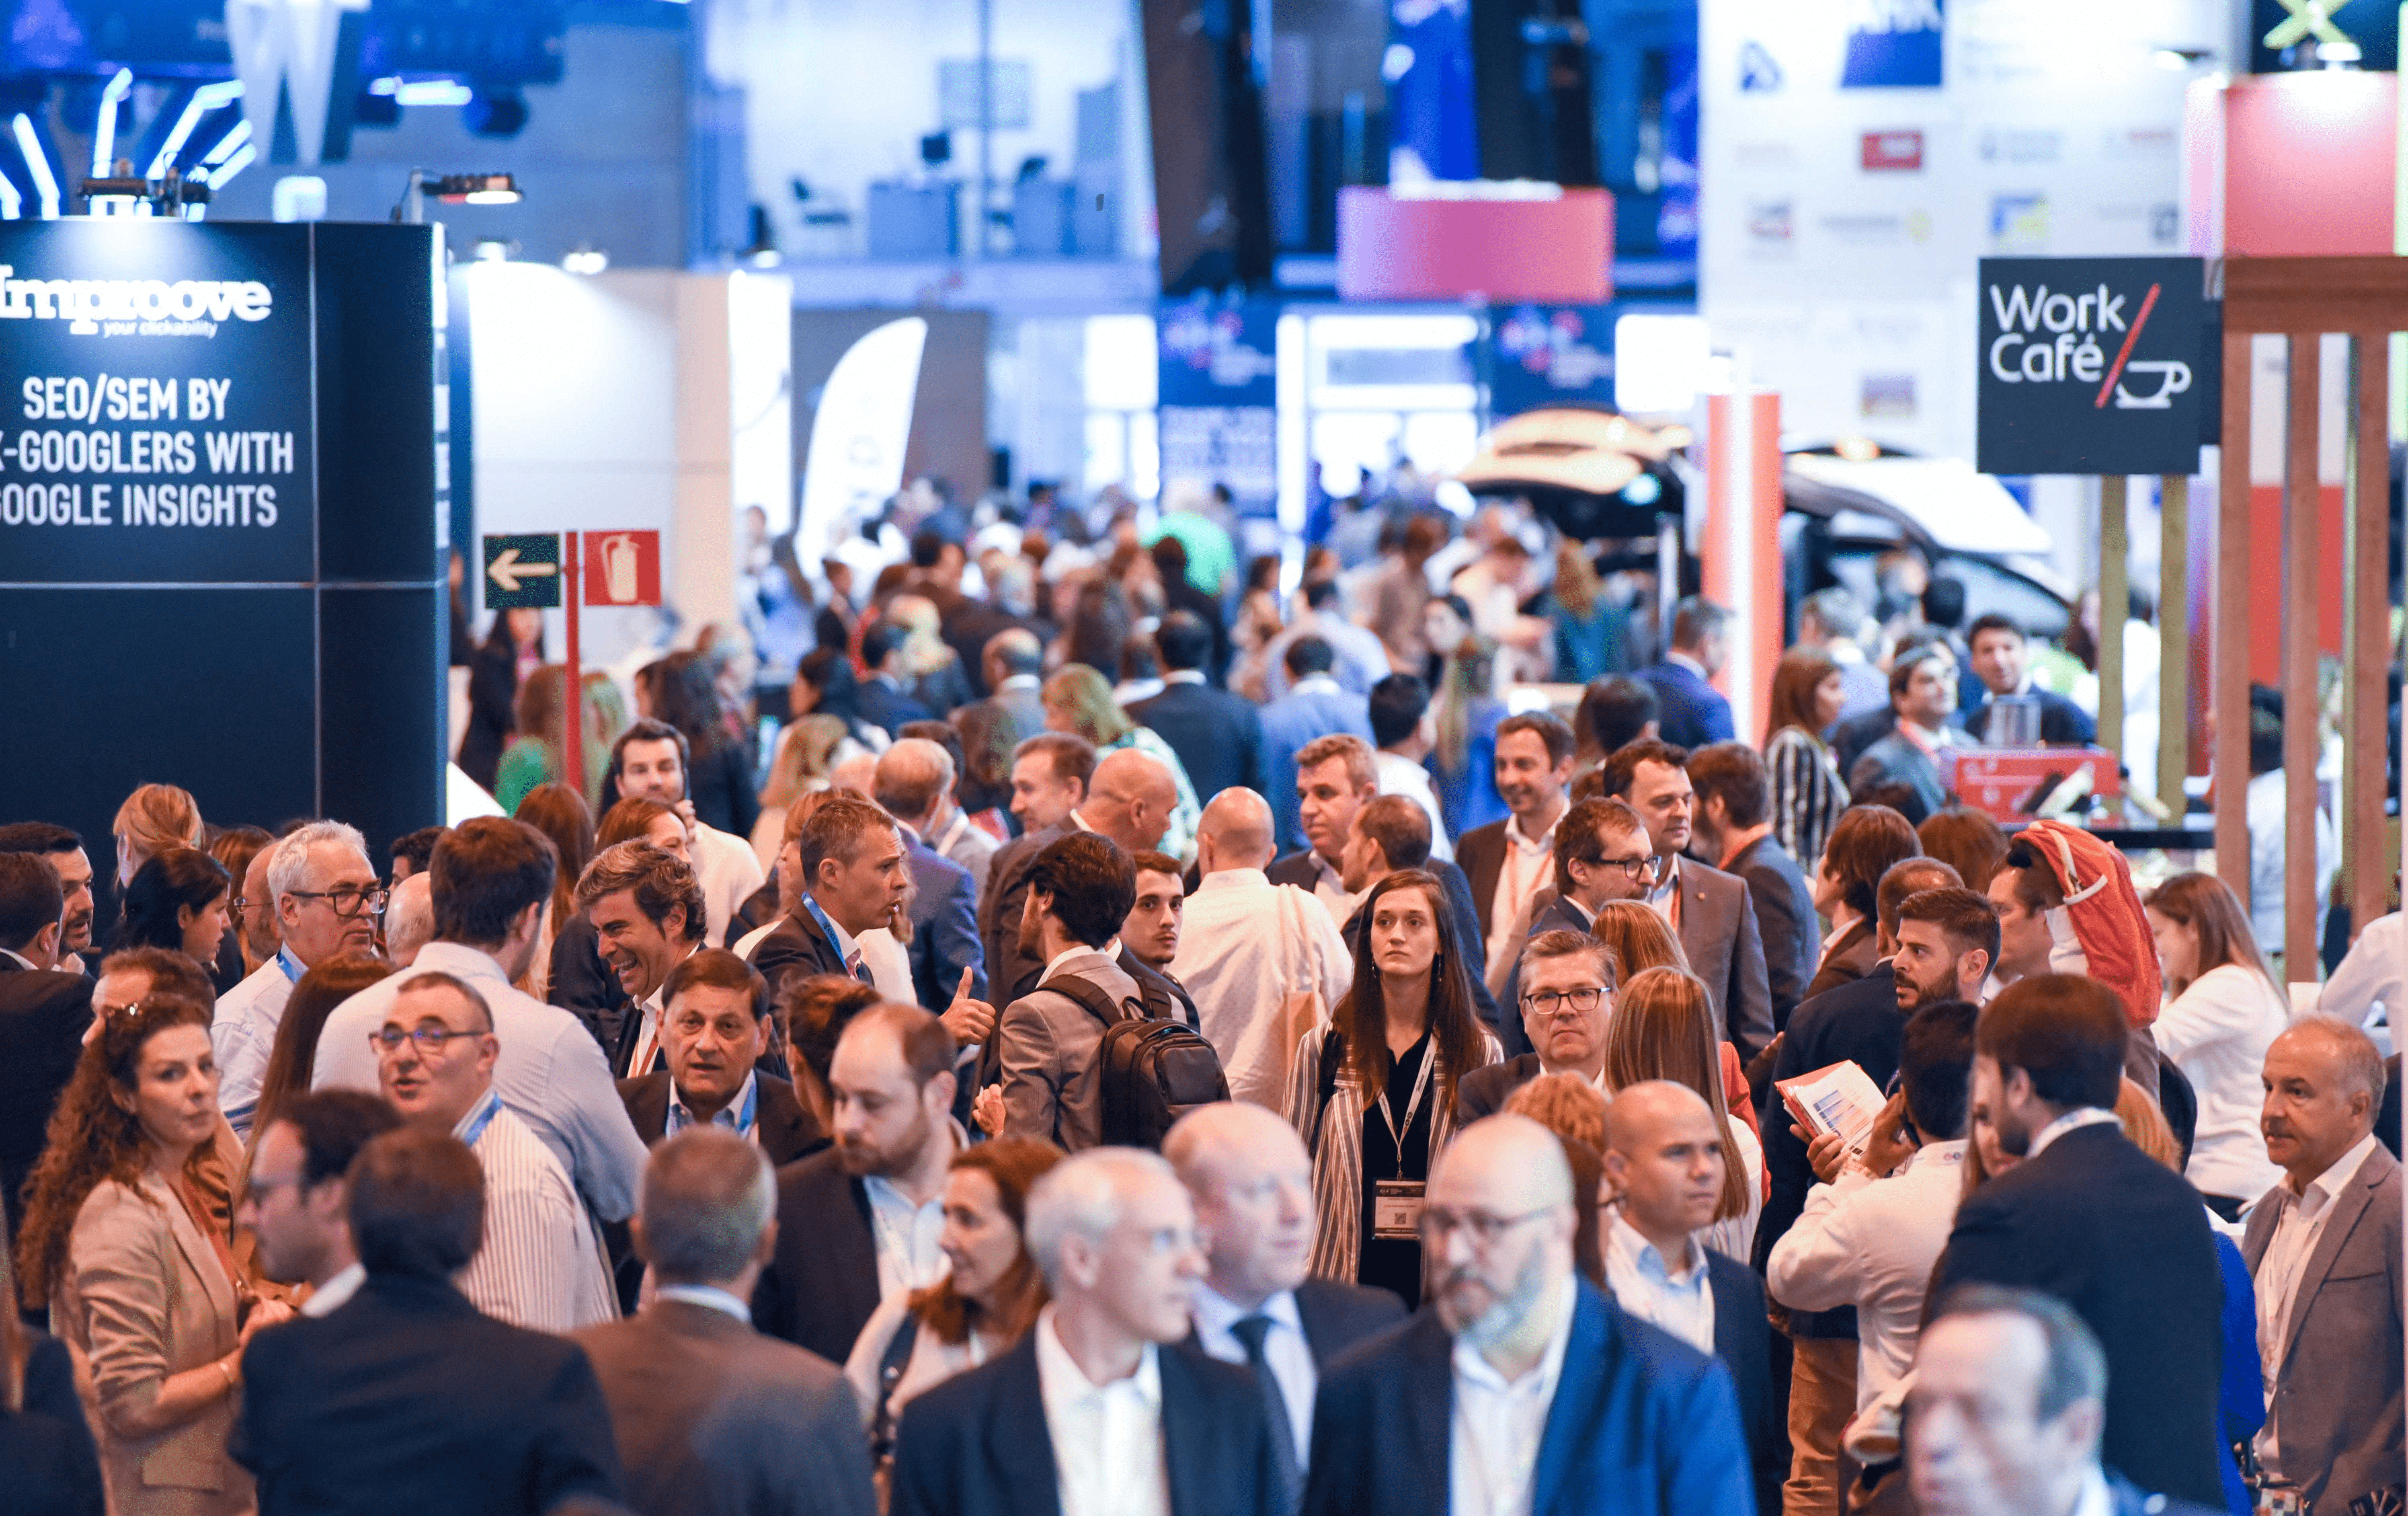 More than 2,7000 registered attendees at eMobility Expo World Congress in just one week